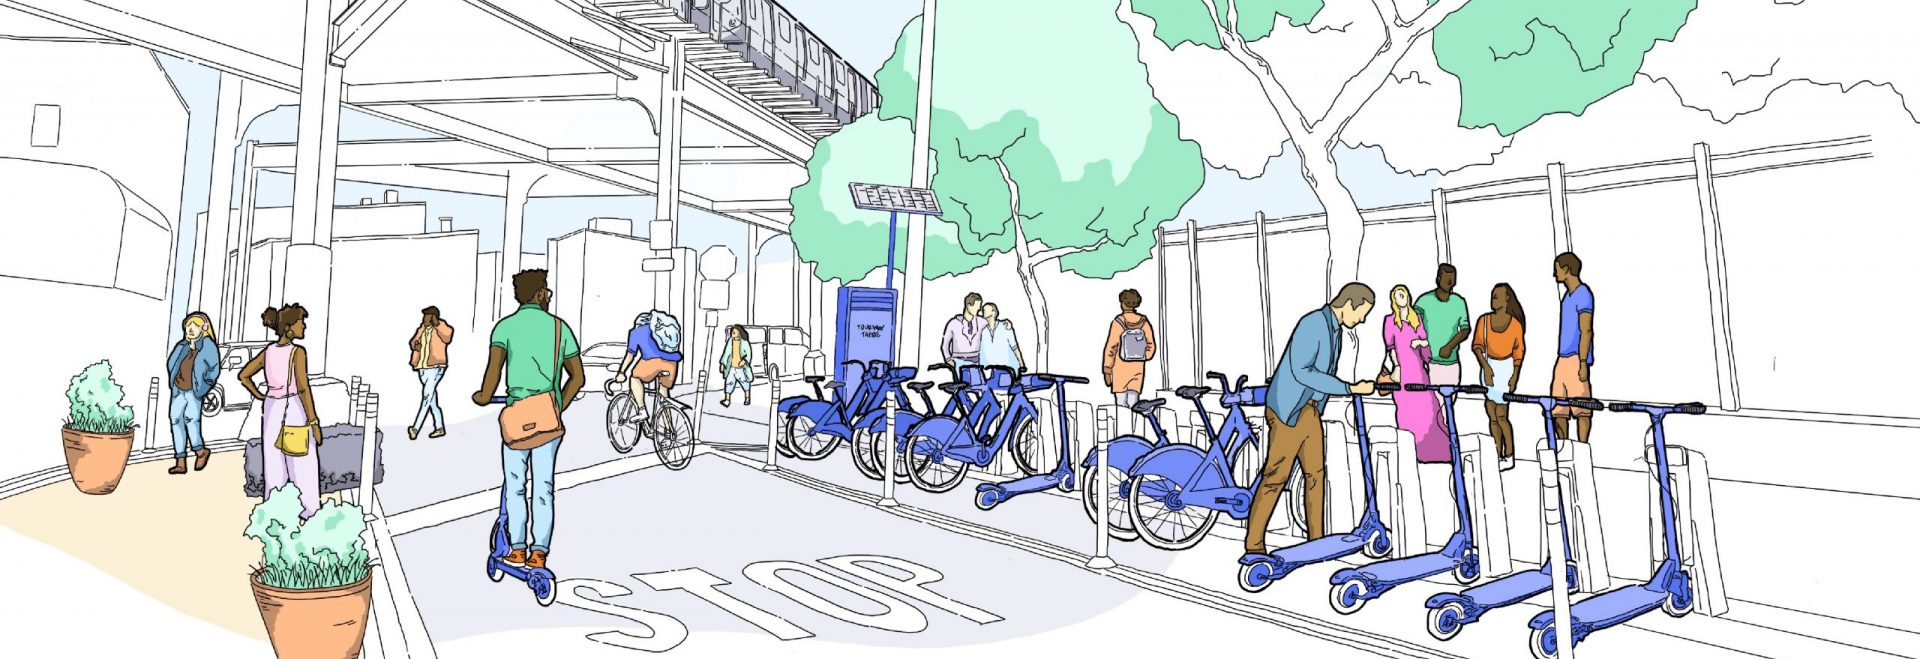 Downtown Culver City Just Got More Walkable, Bikeable, and Transit-Friendly